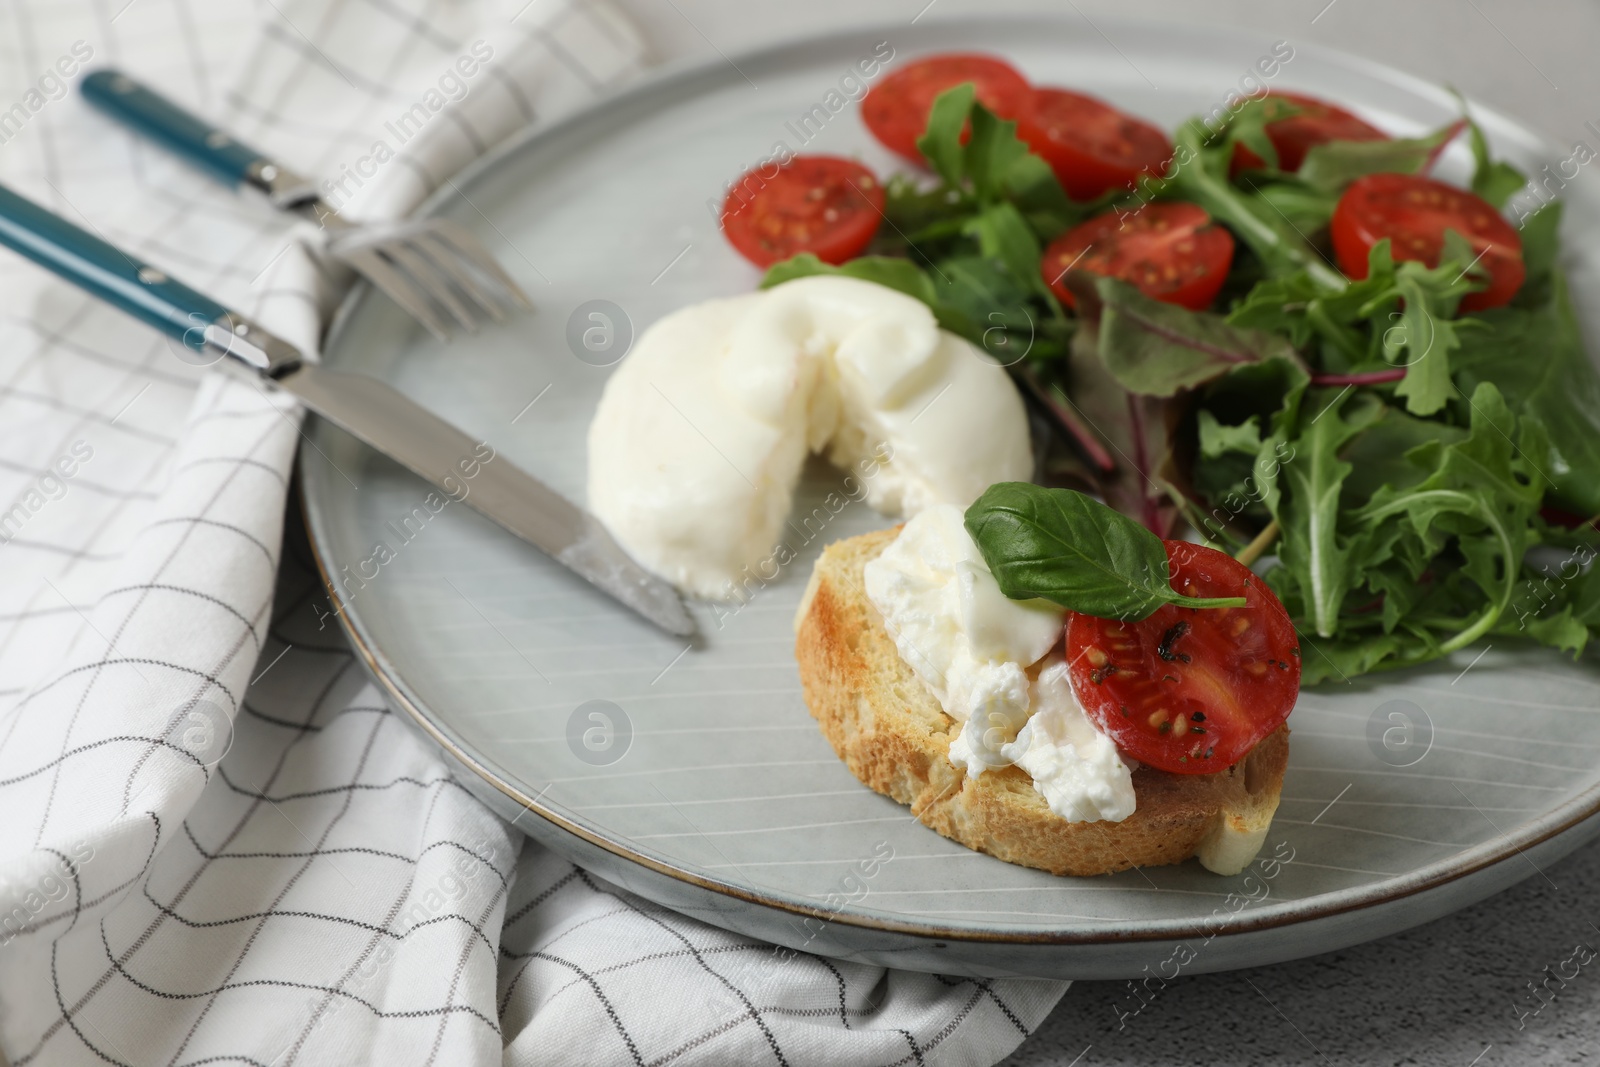 Photo of Delicious burrata cheese with tomatoes, arugula and toast served on grey table, closeup